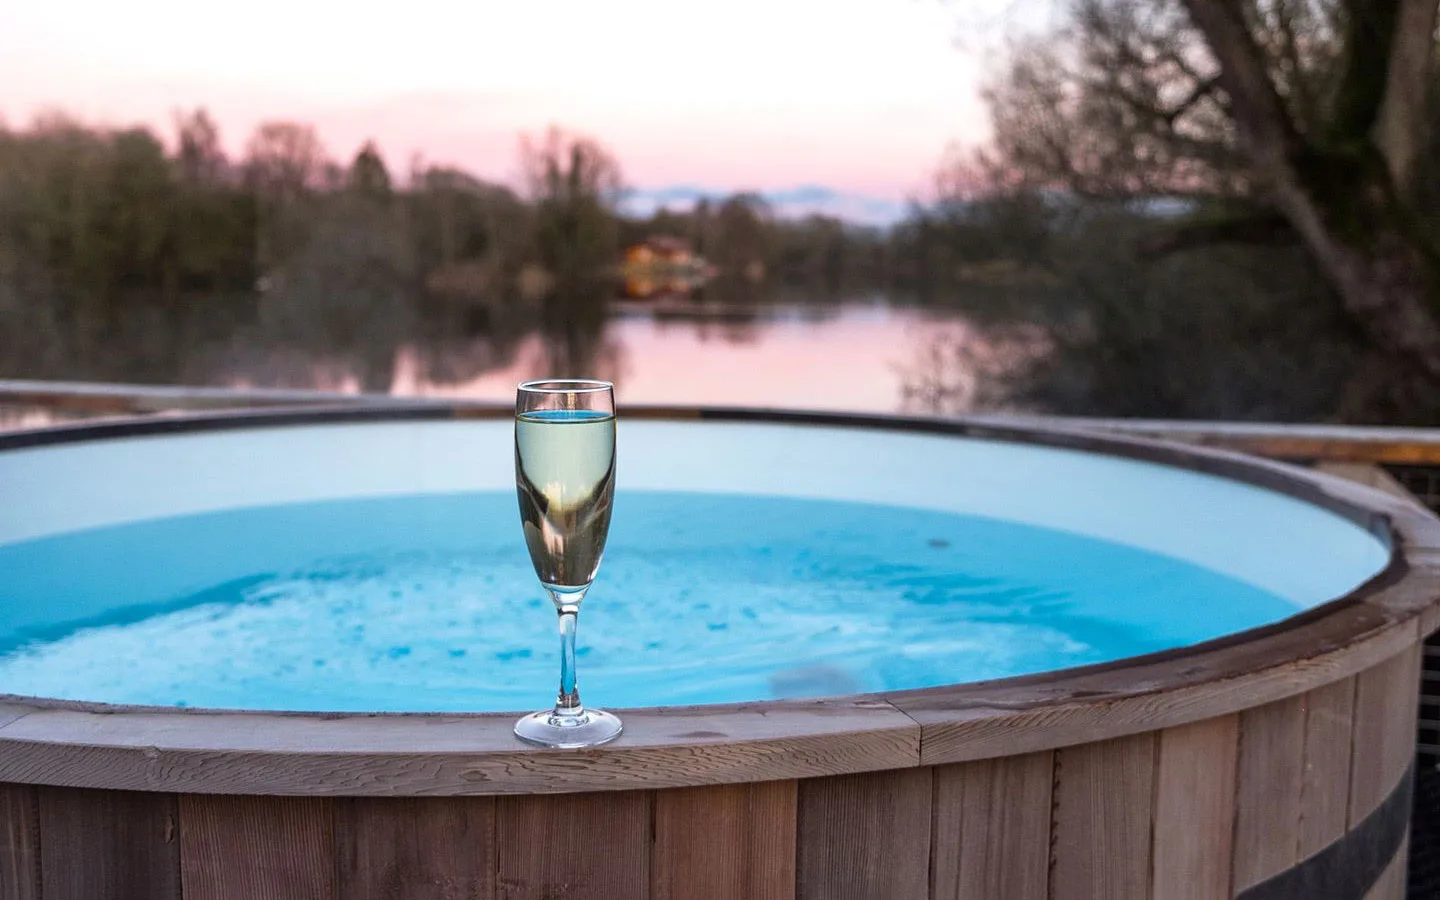 Prosecco by the hot tub at sunset at Log House Holidays